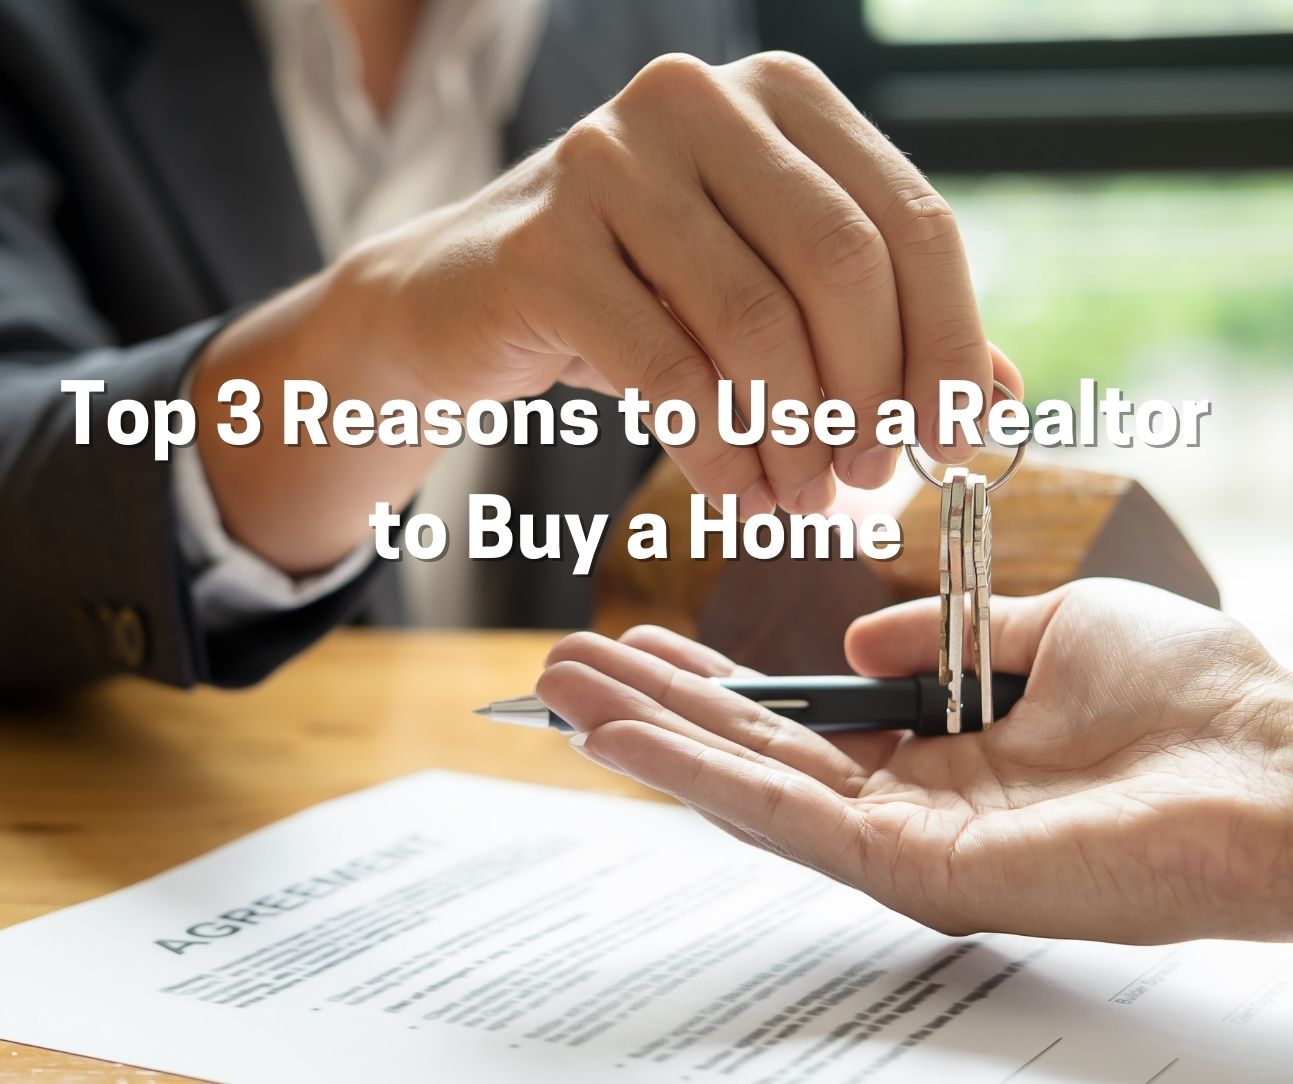 Top 3 Reasons to Use a Realtor to Buy a Home